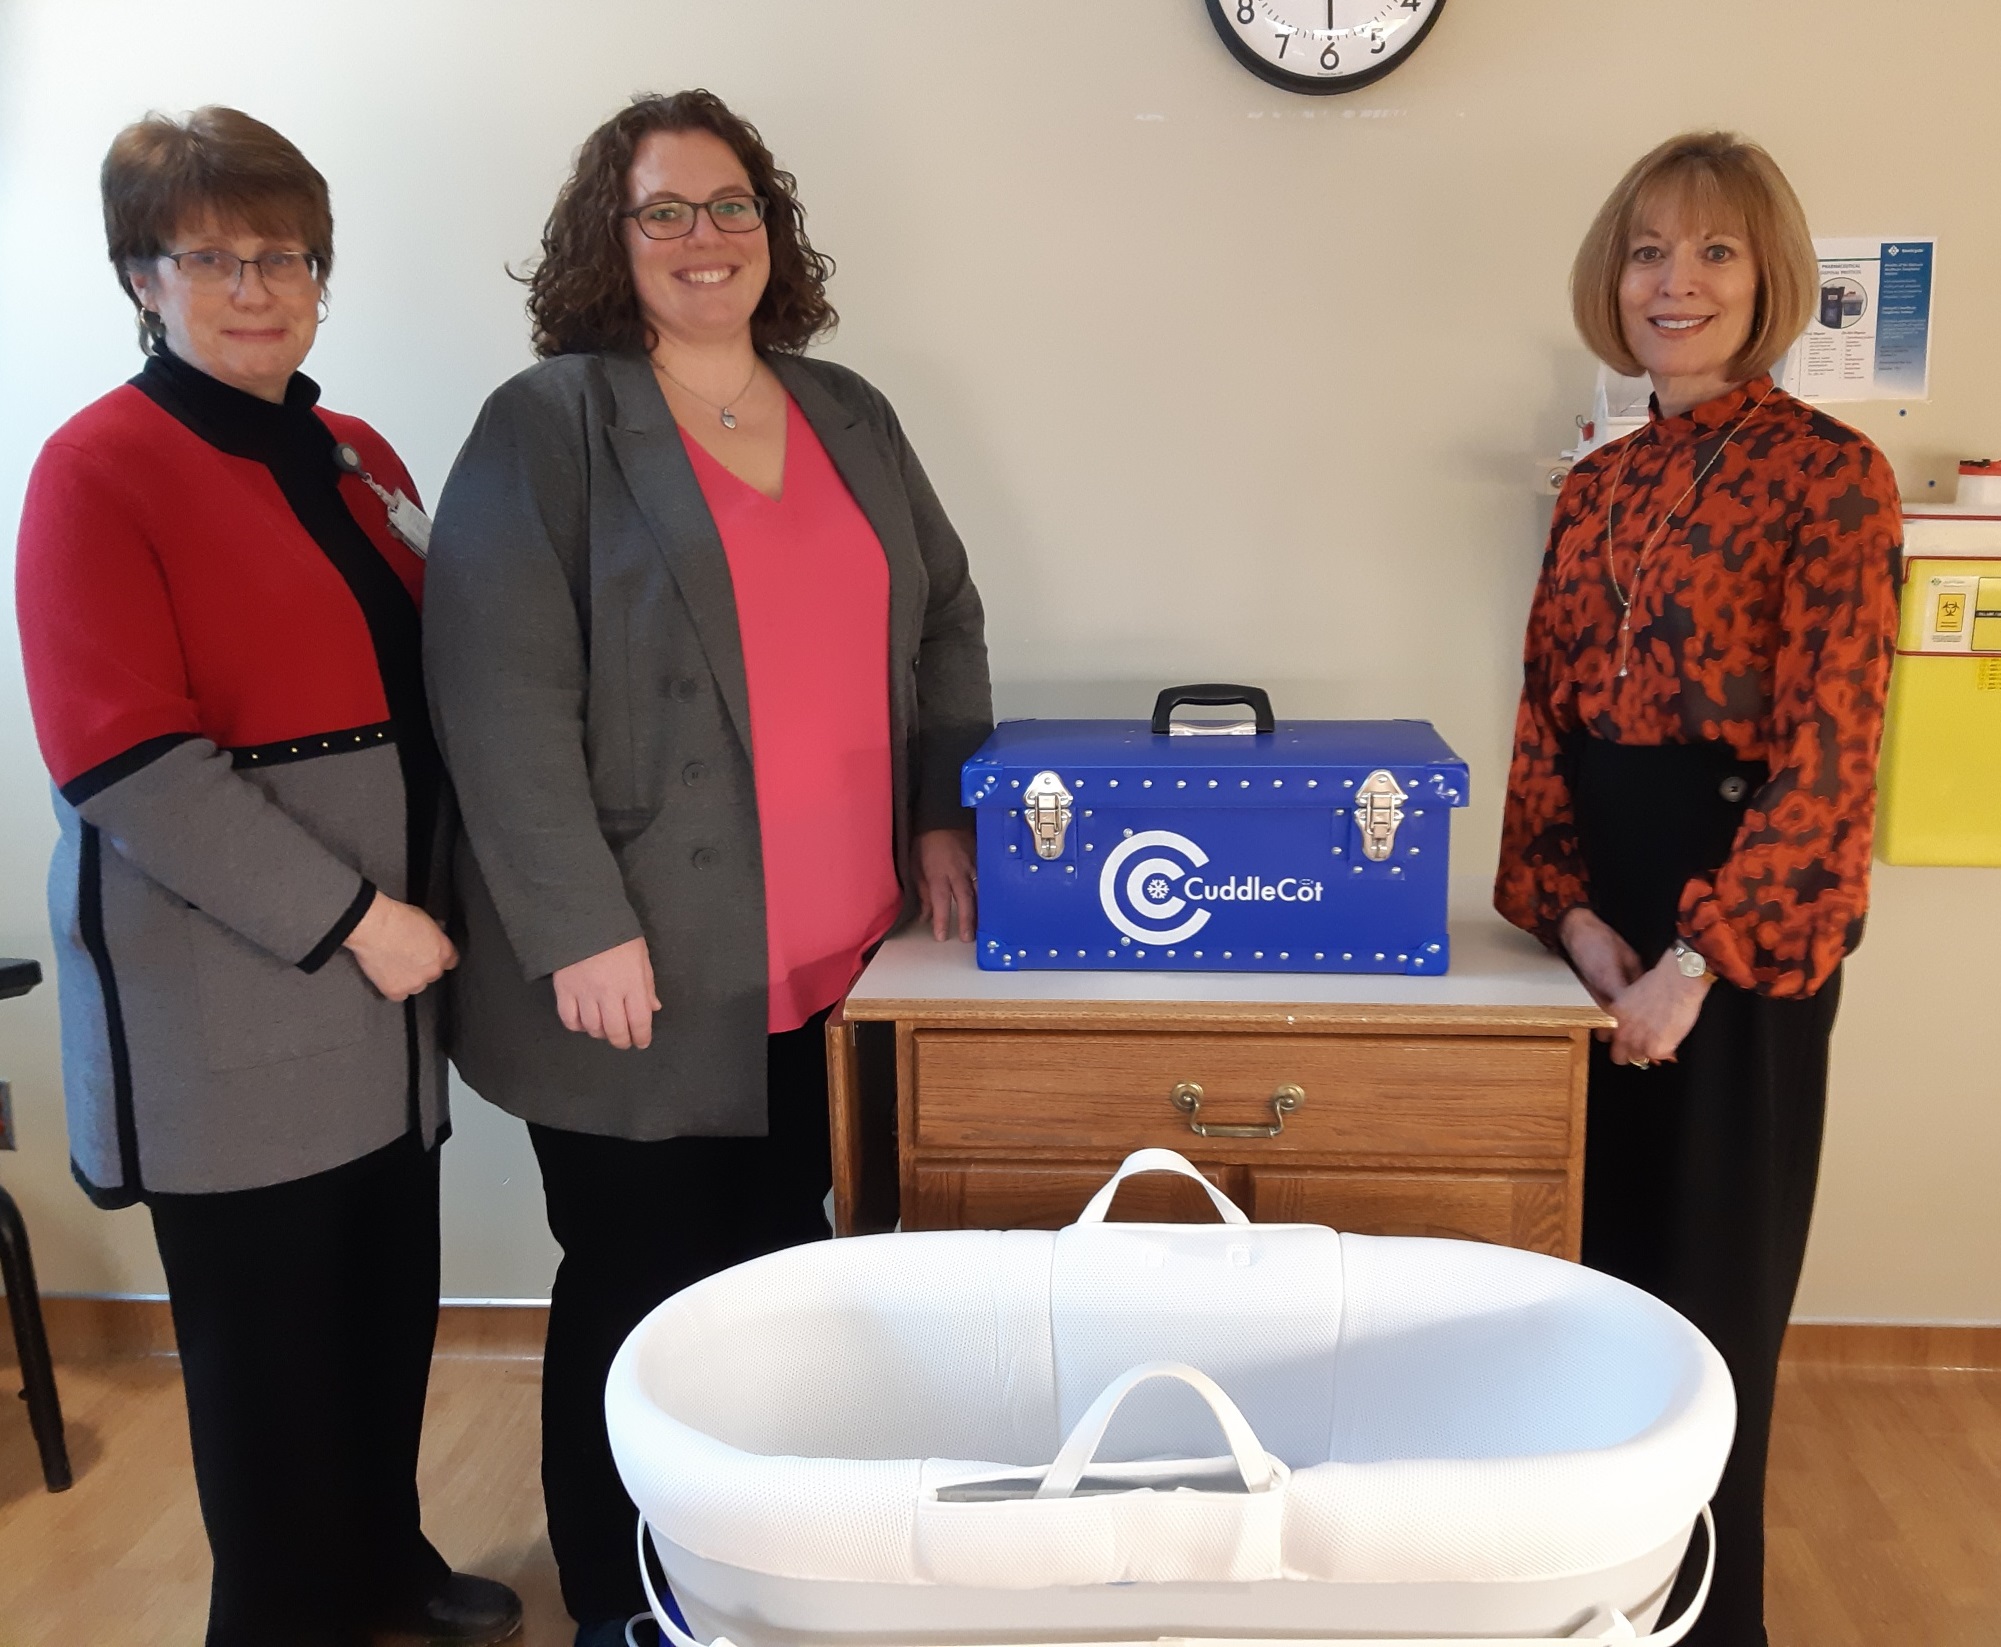 BUTTERFLY RUN RAISES FUNDS TO PURCHASE CUDDLE COT FOR BROCKVILLE GENERAL HOSPITAL'S WOMEN & CHILDREN'S PROGRAM 